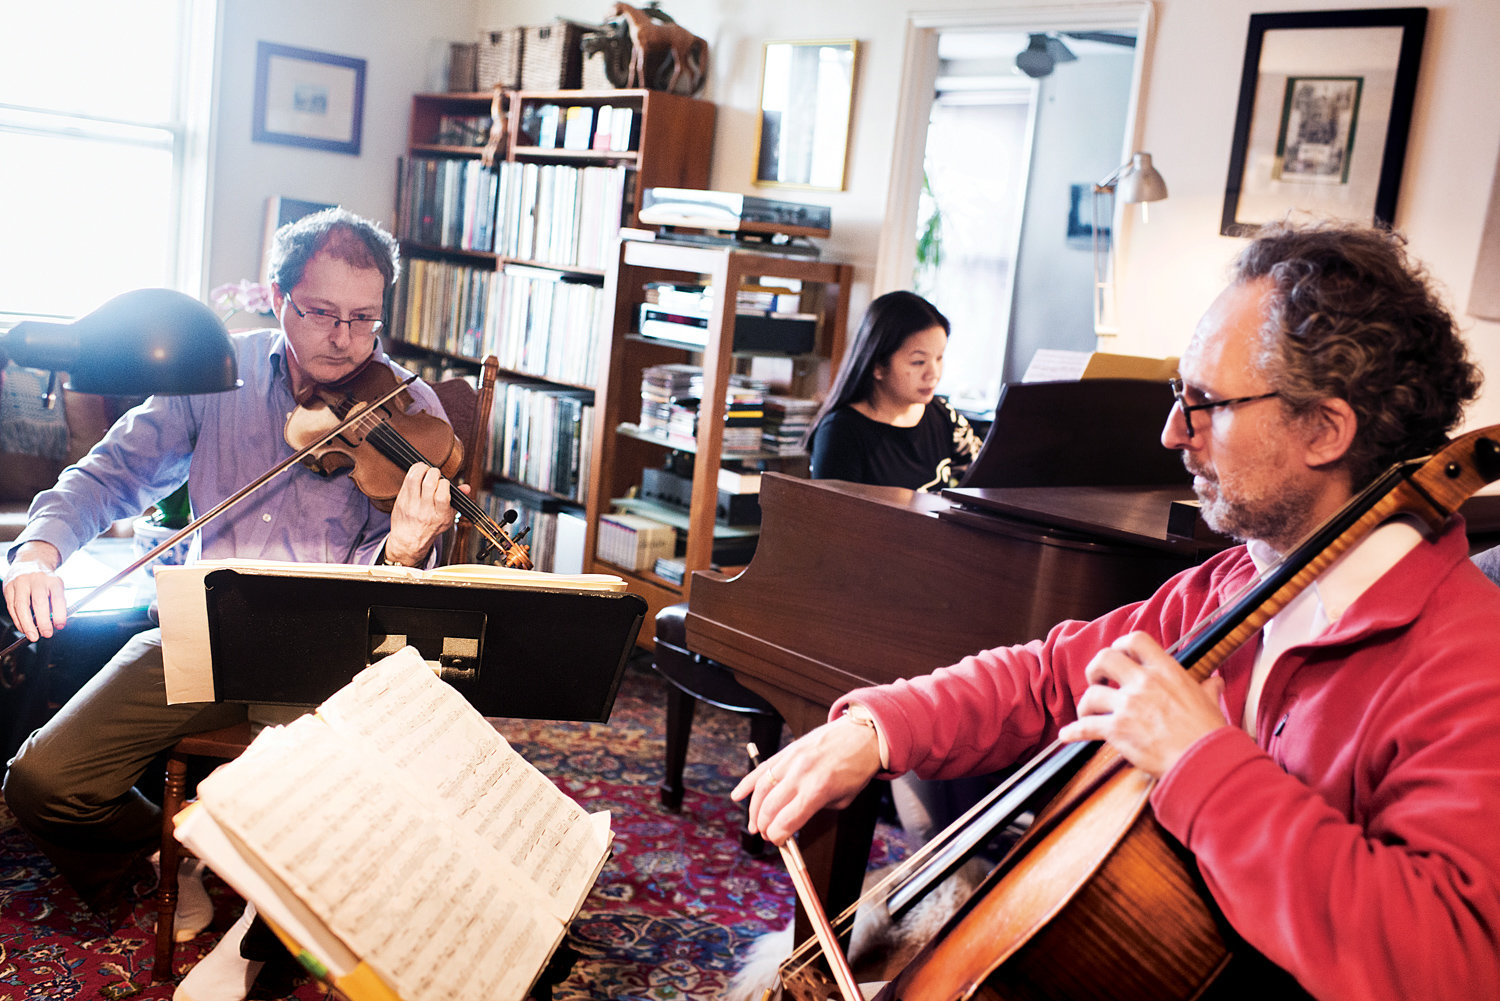 Formed in 2001, the di.vi.sion trio — seen here at a rehearsal in 2015 — will perform a classical music concert at the Riverdale-Yonkers Society for Ethical Culture on Dec. 1.